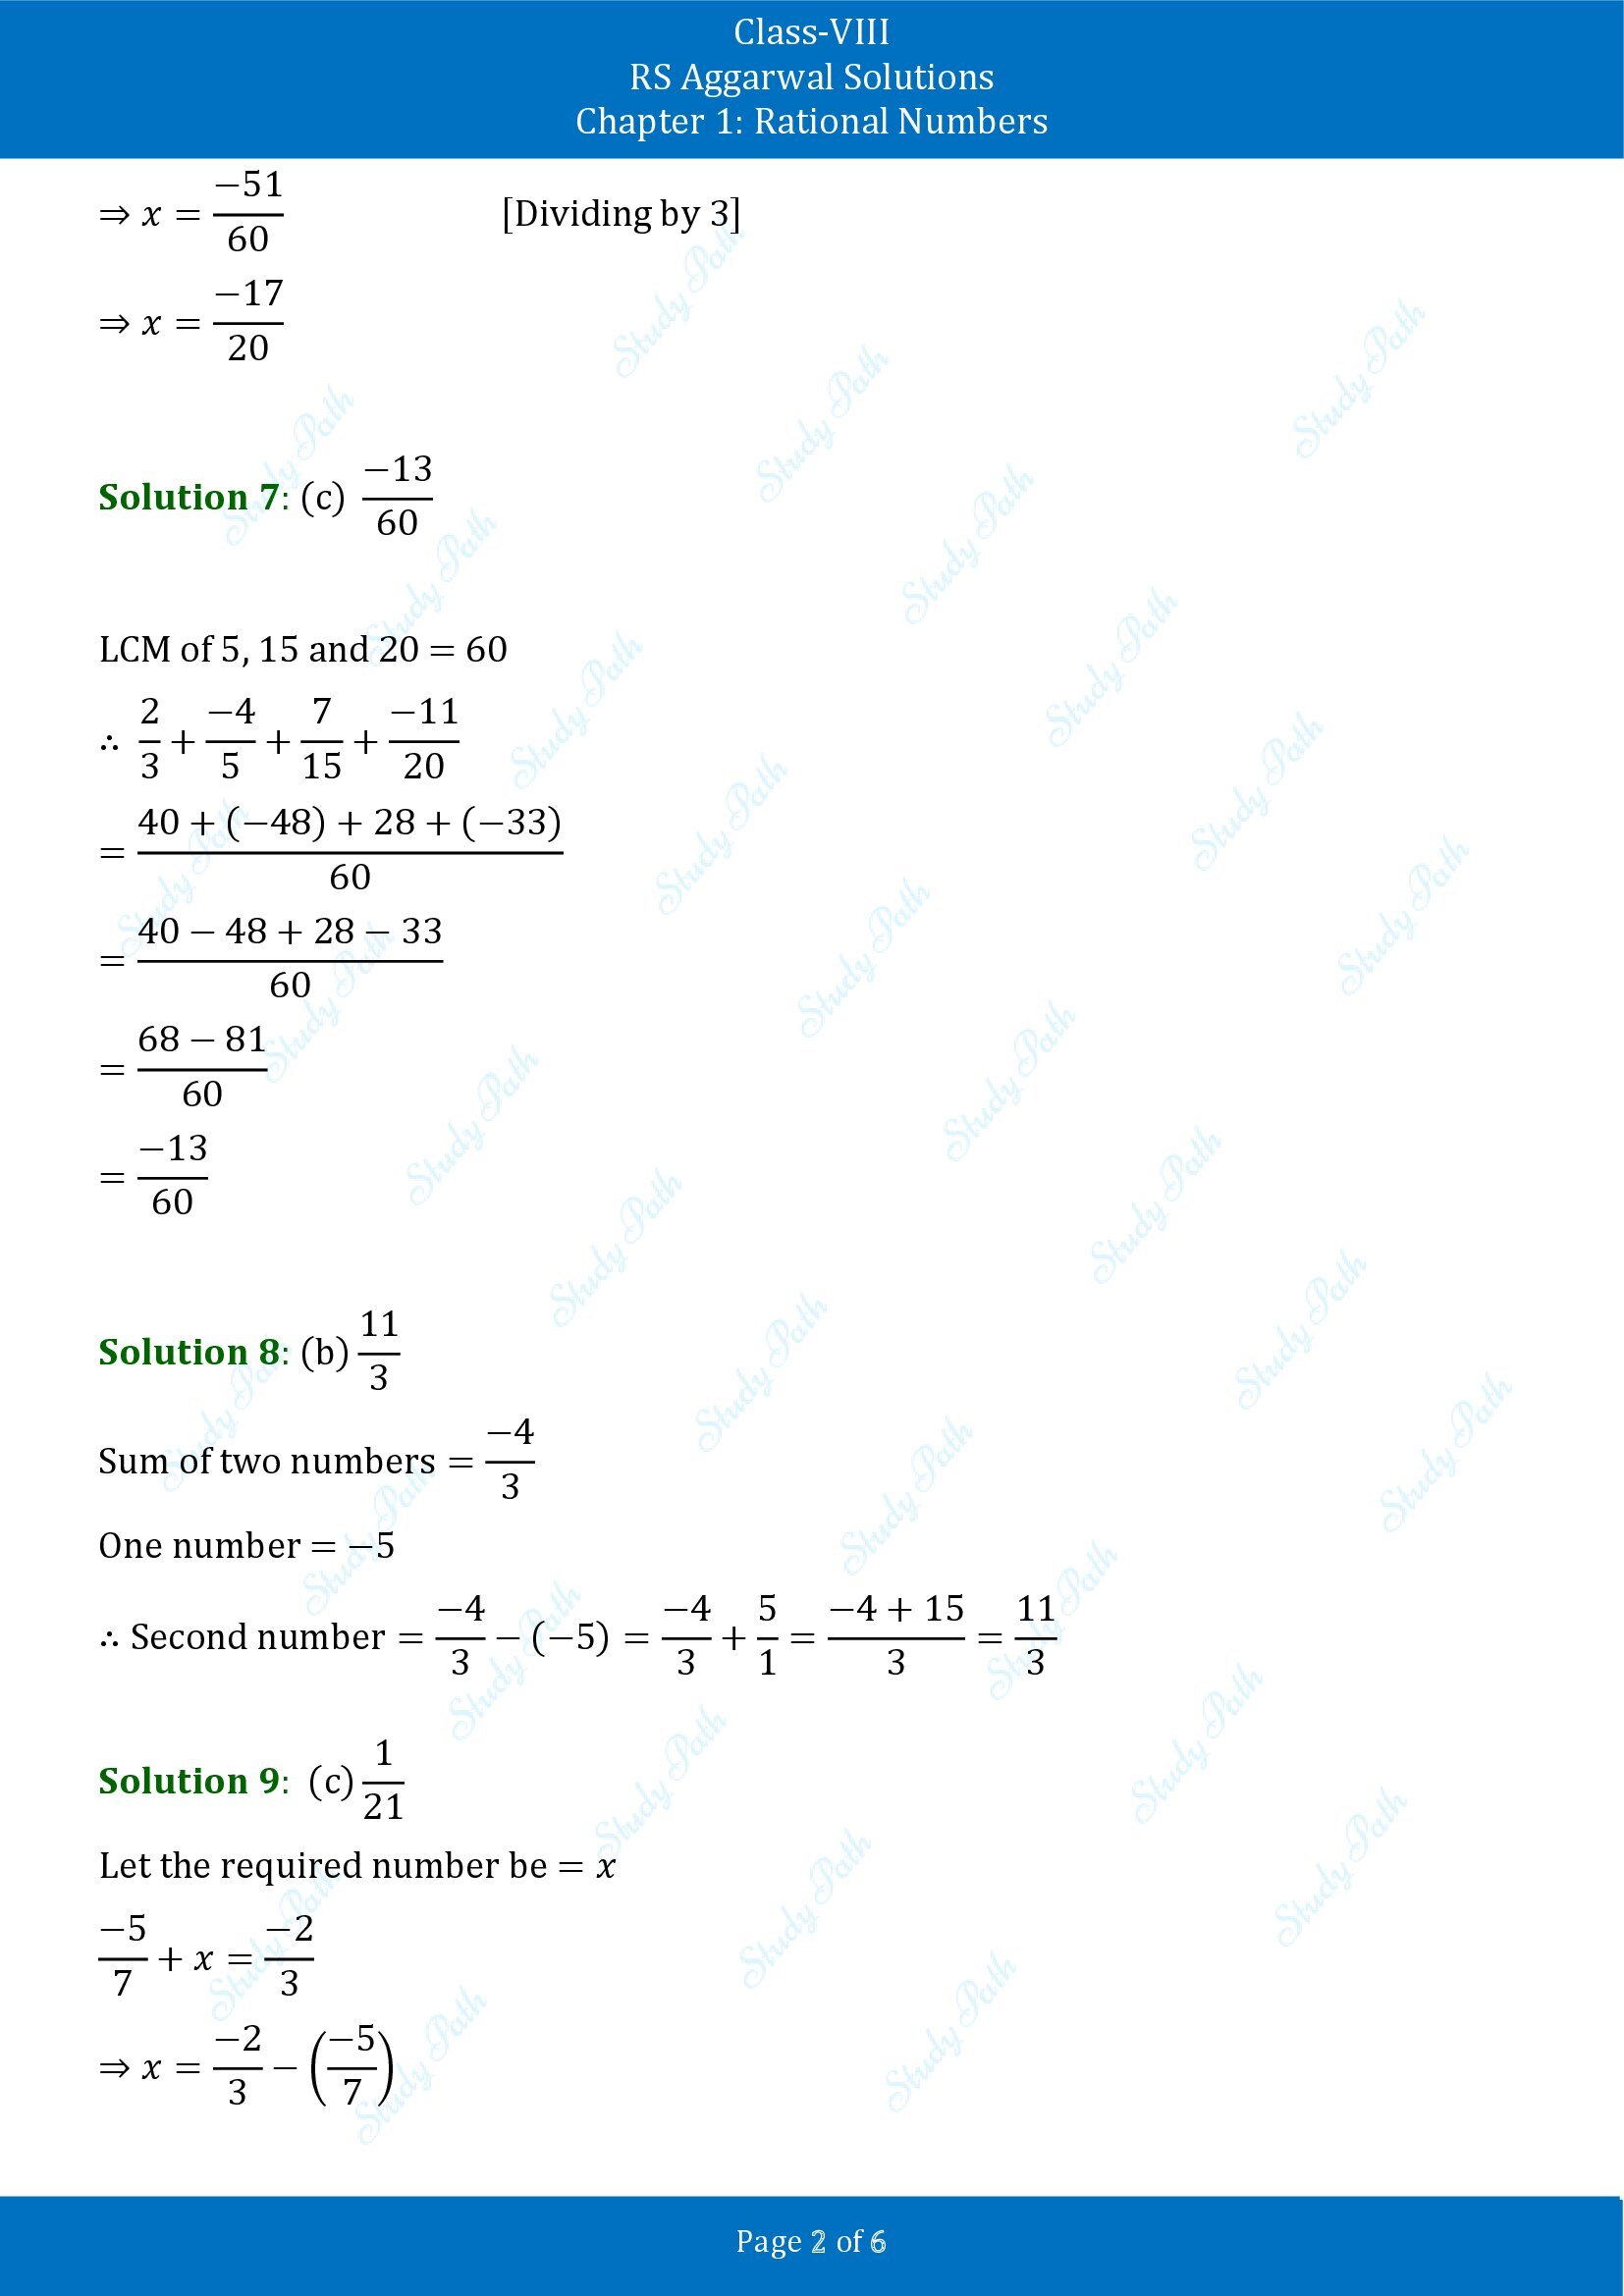 RS Aggarwal Solutions Class 8 Chapter 1 Rational Numbers Exercise 1H MCQs 00002